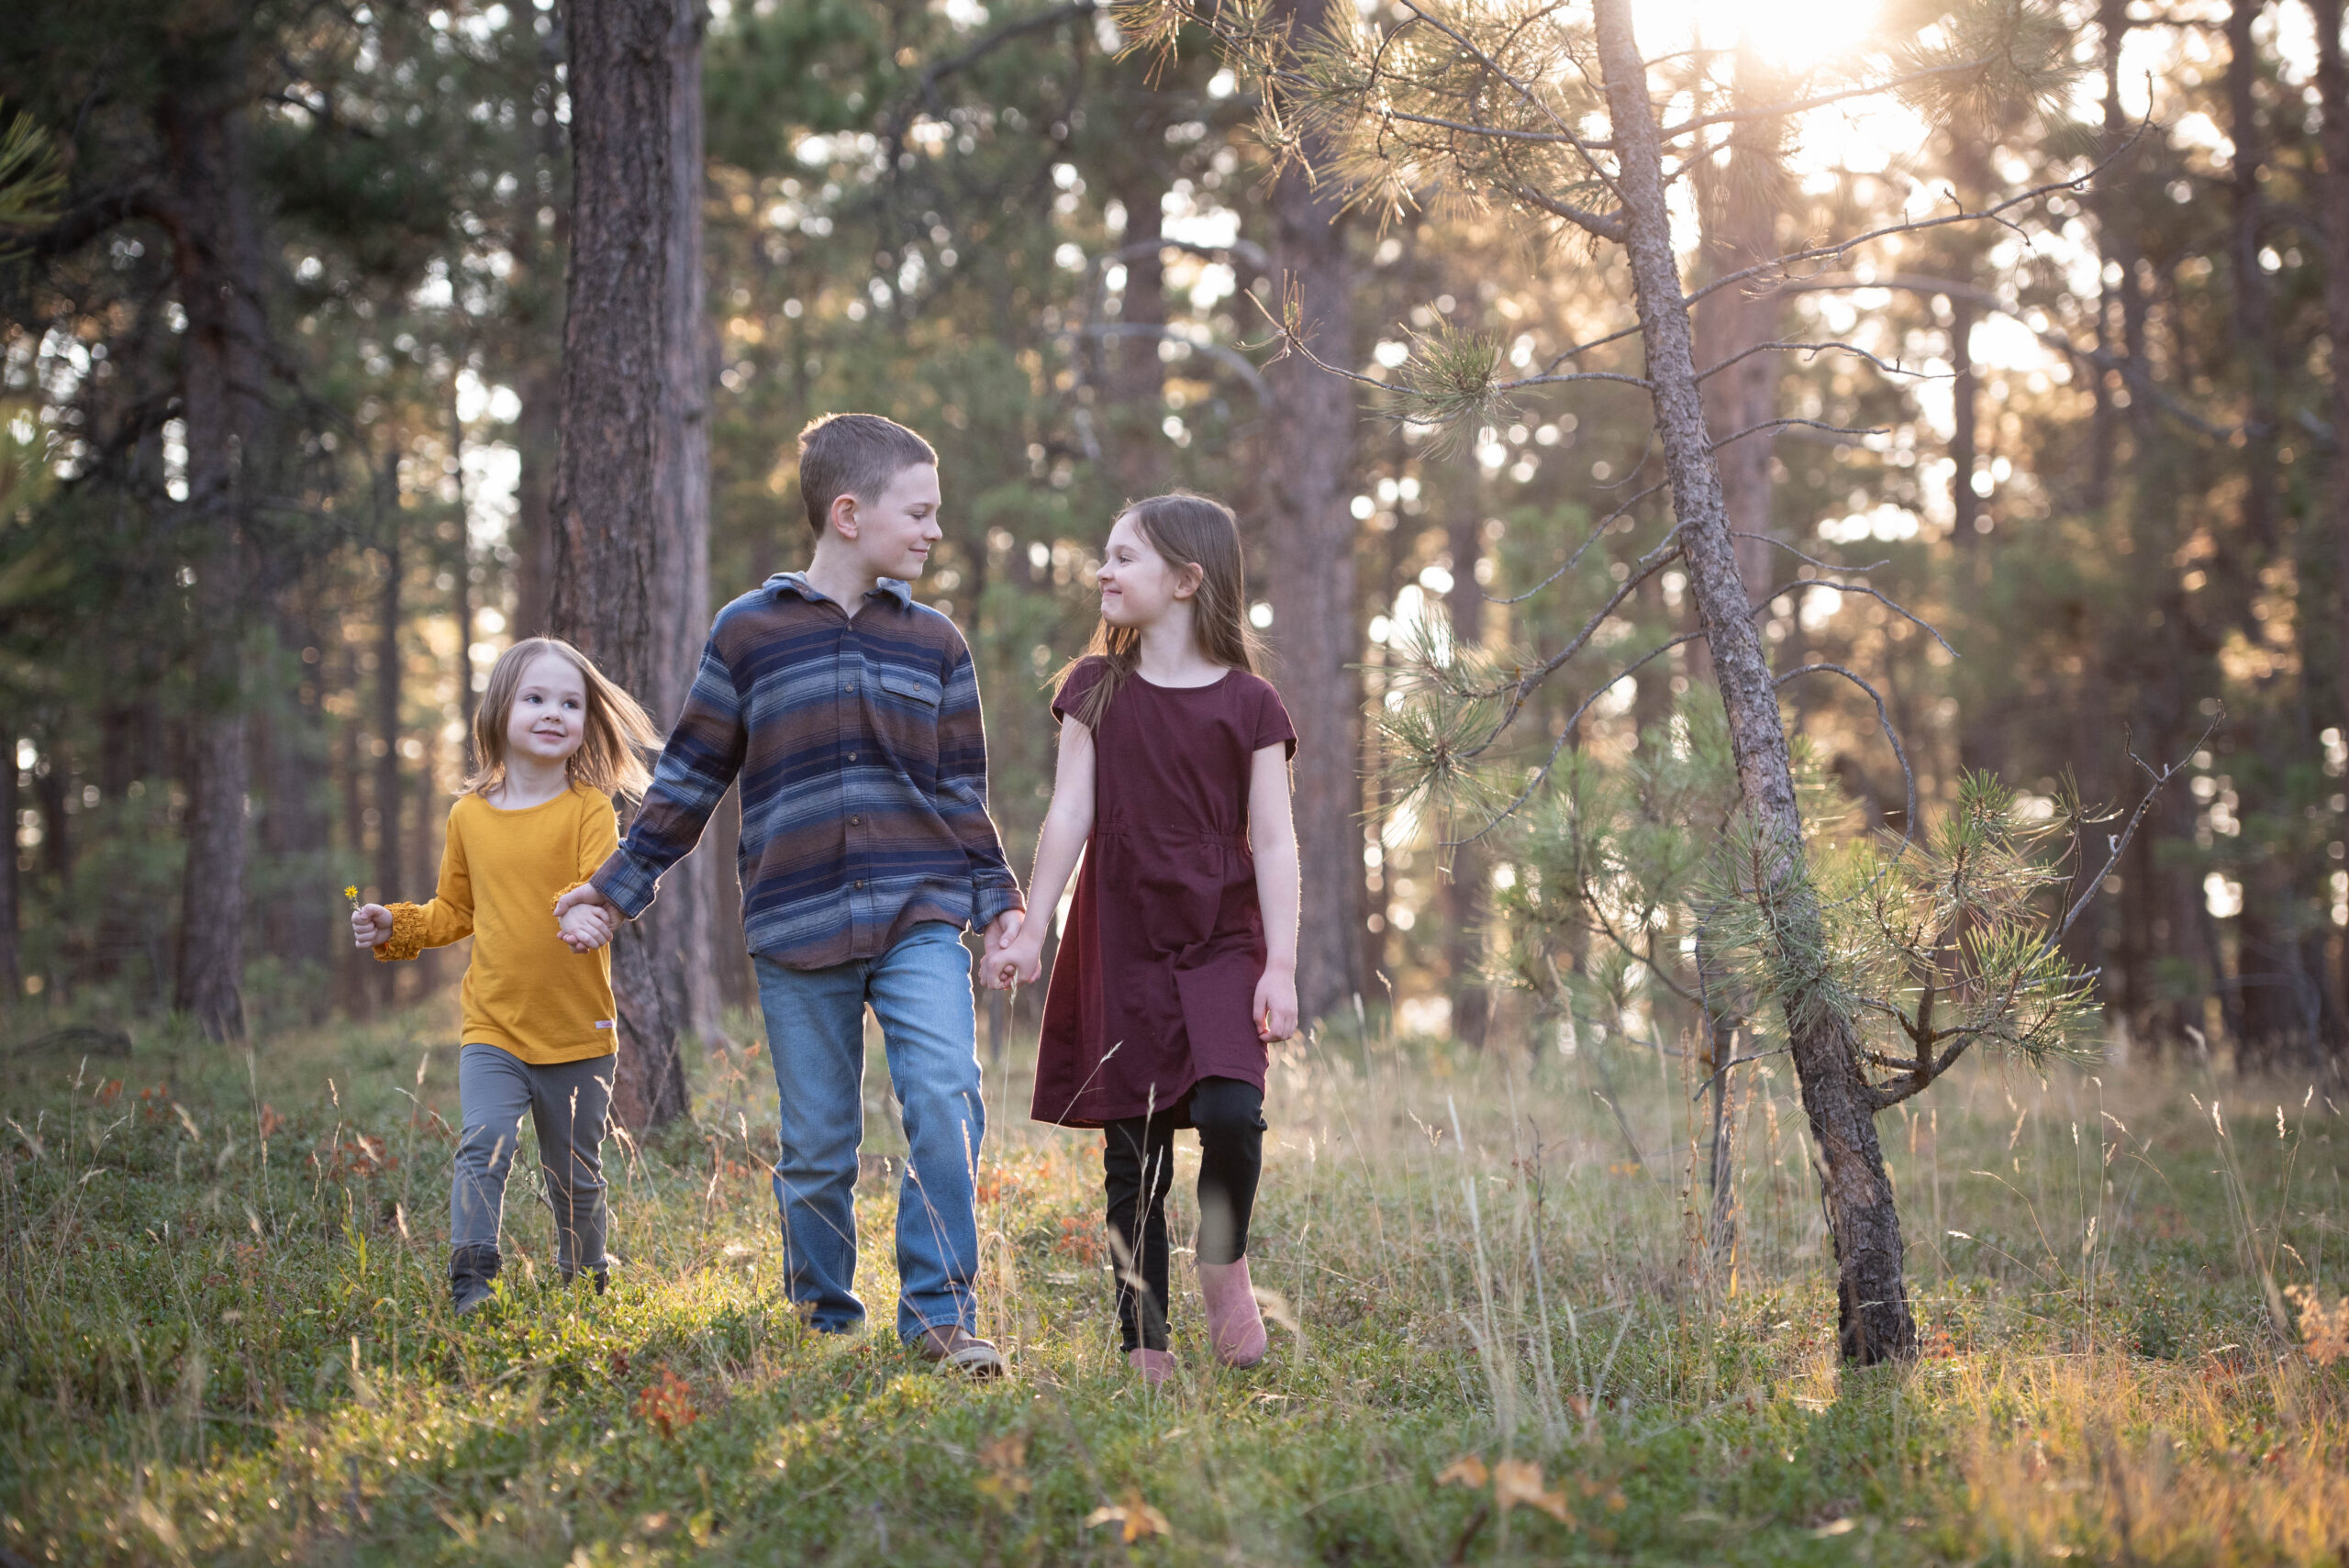 Three young siblings hold hands and walk through some woods Matthews-Vu Medical Group